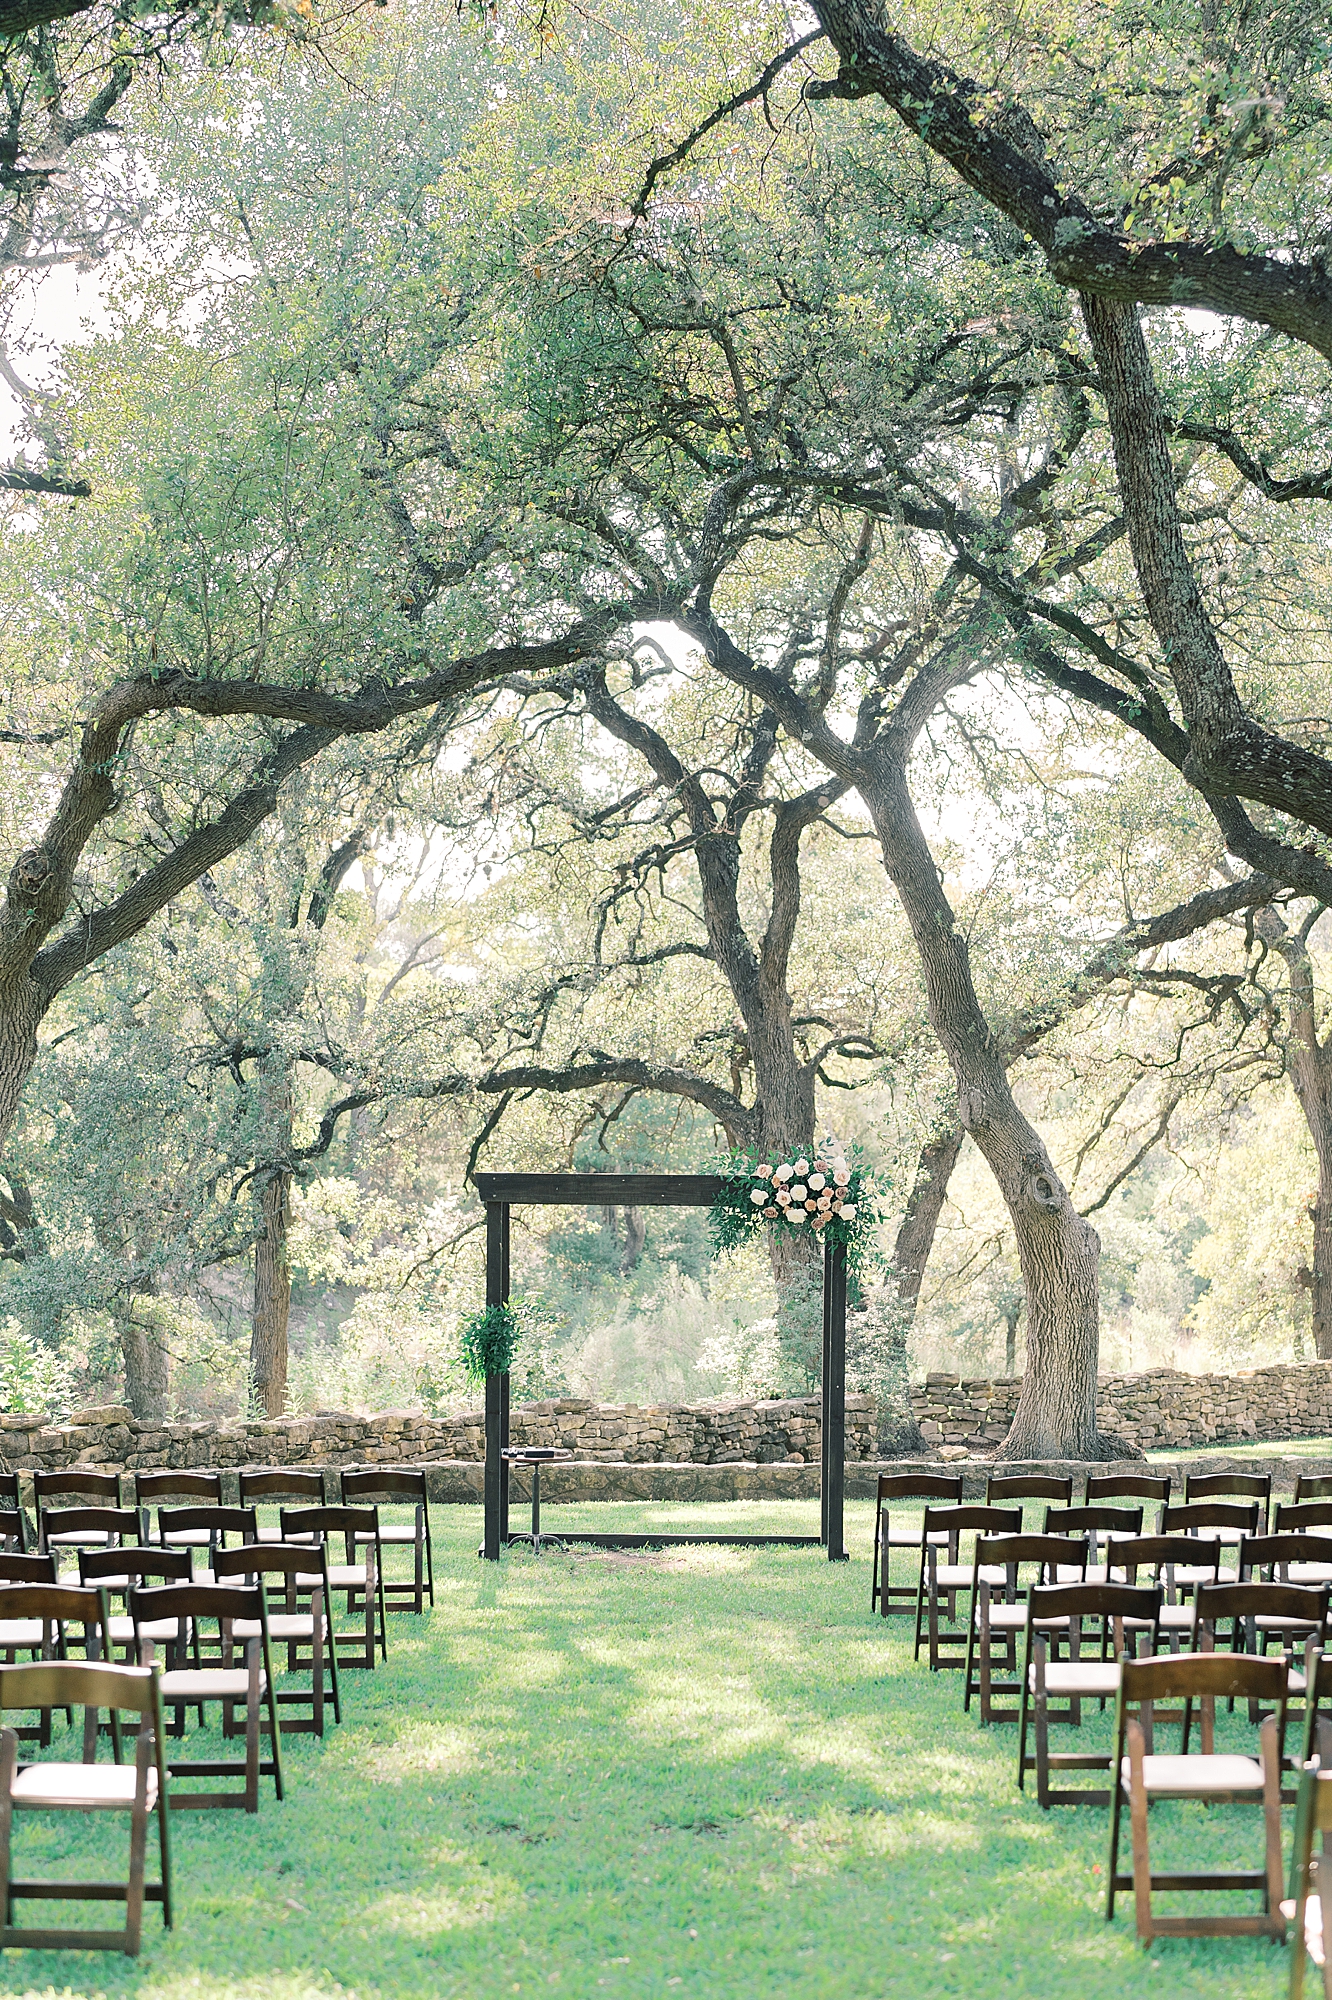 This wedding day at The Addison Grove was perfect in every way! The ceremony was set up in front of the pond under the gorgeous tall trees. Click through to see this gorgeous wedding, and some of the sweetest romantic bride and groom portraits you've ever seen! #theaddisongrove #drippingspringswedding